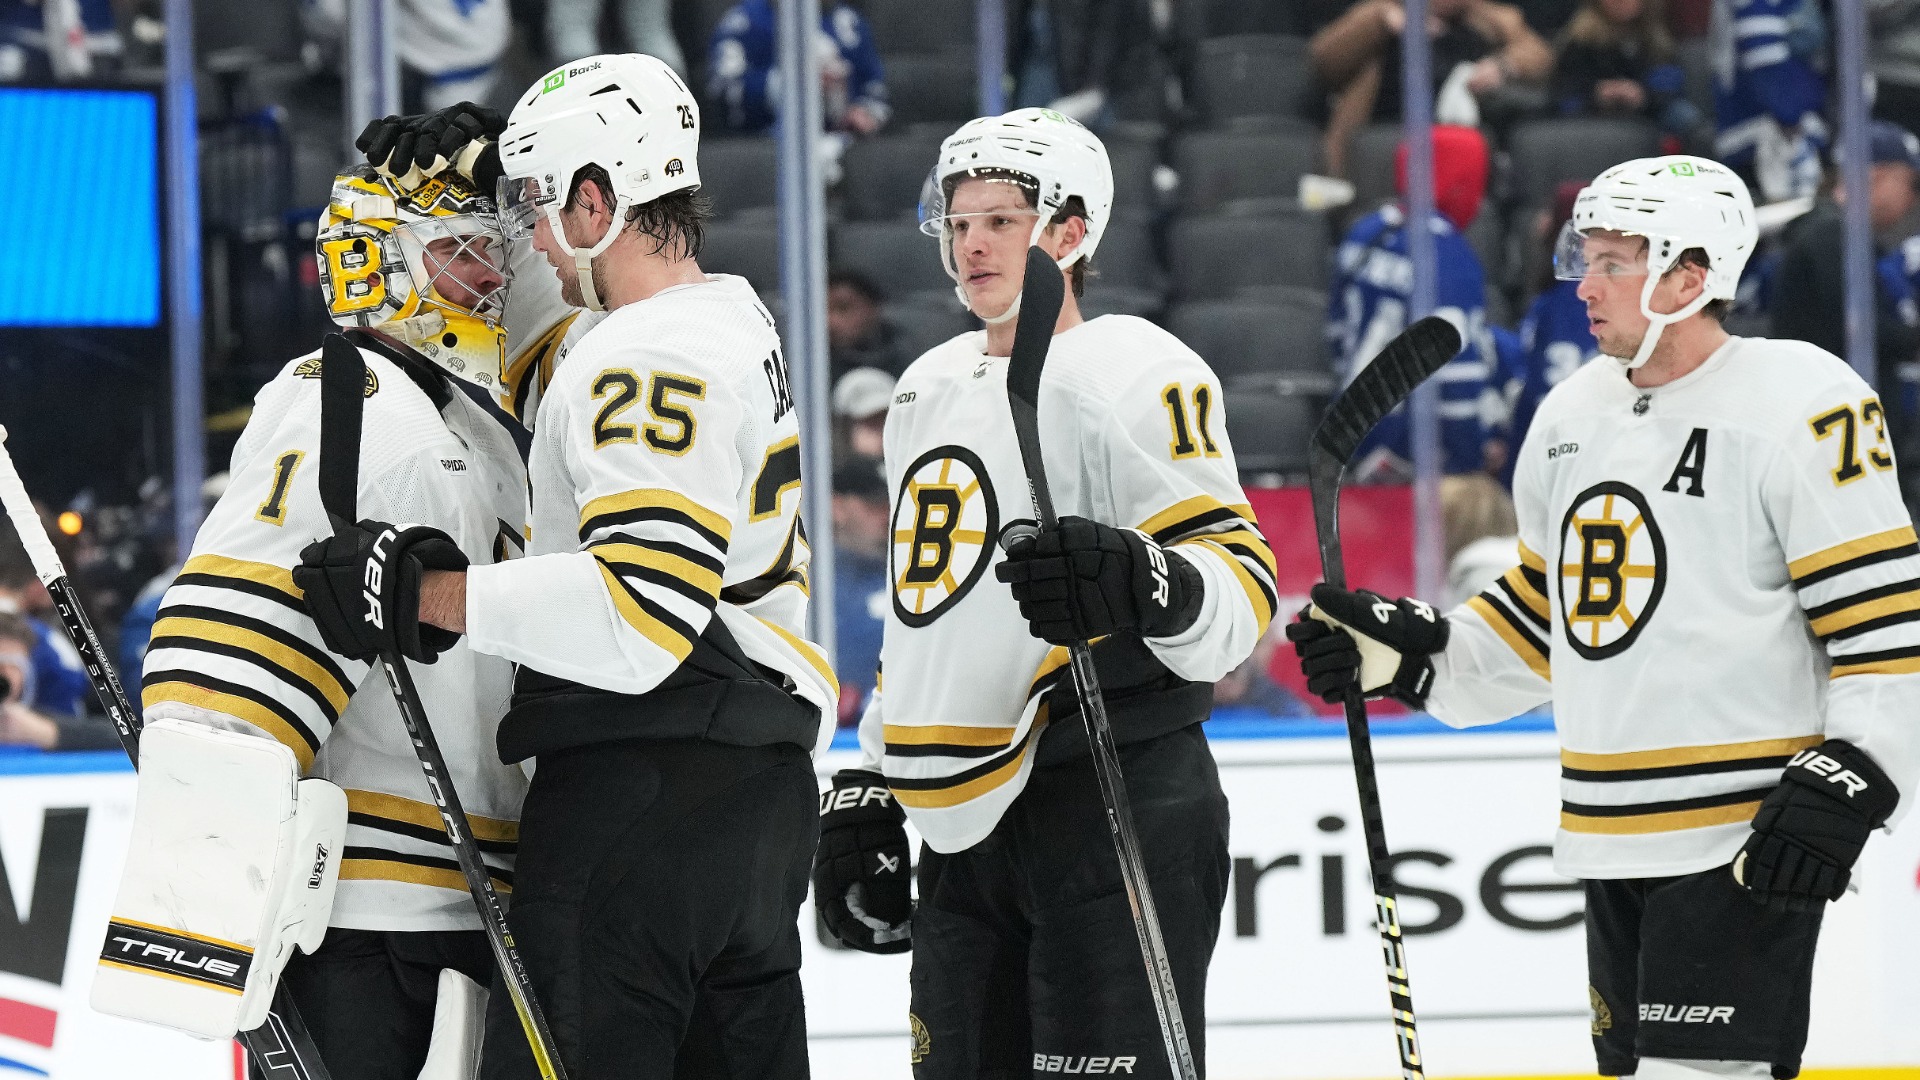 Bruins Notes: Boston Pushes Maple Leafs To Brink Of Elimination